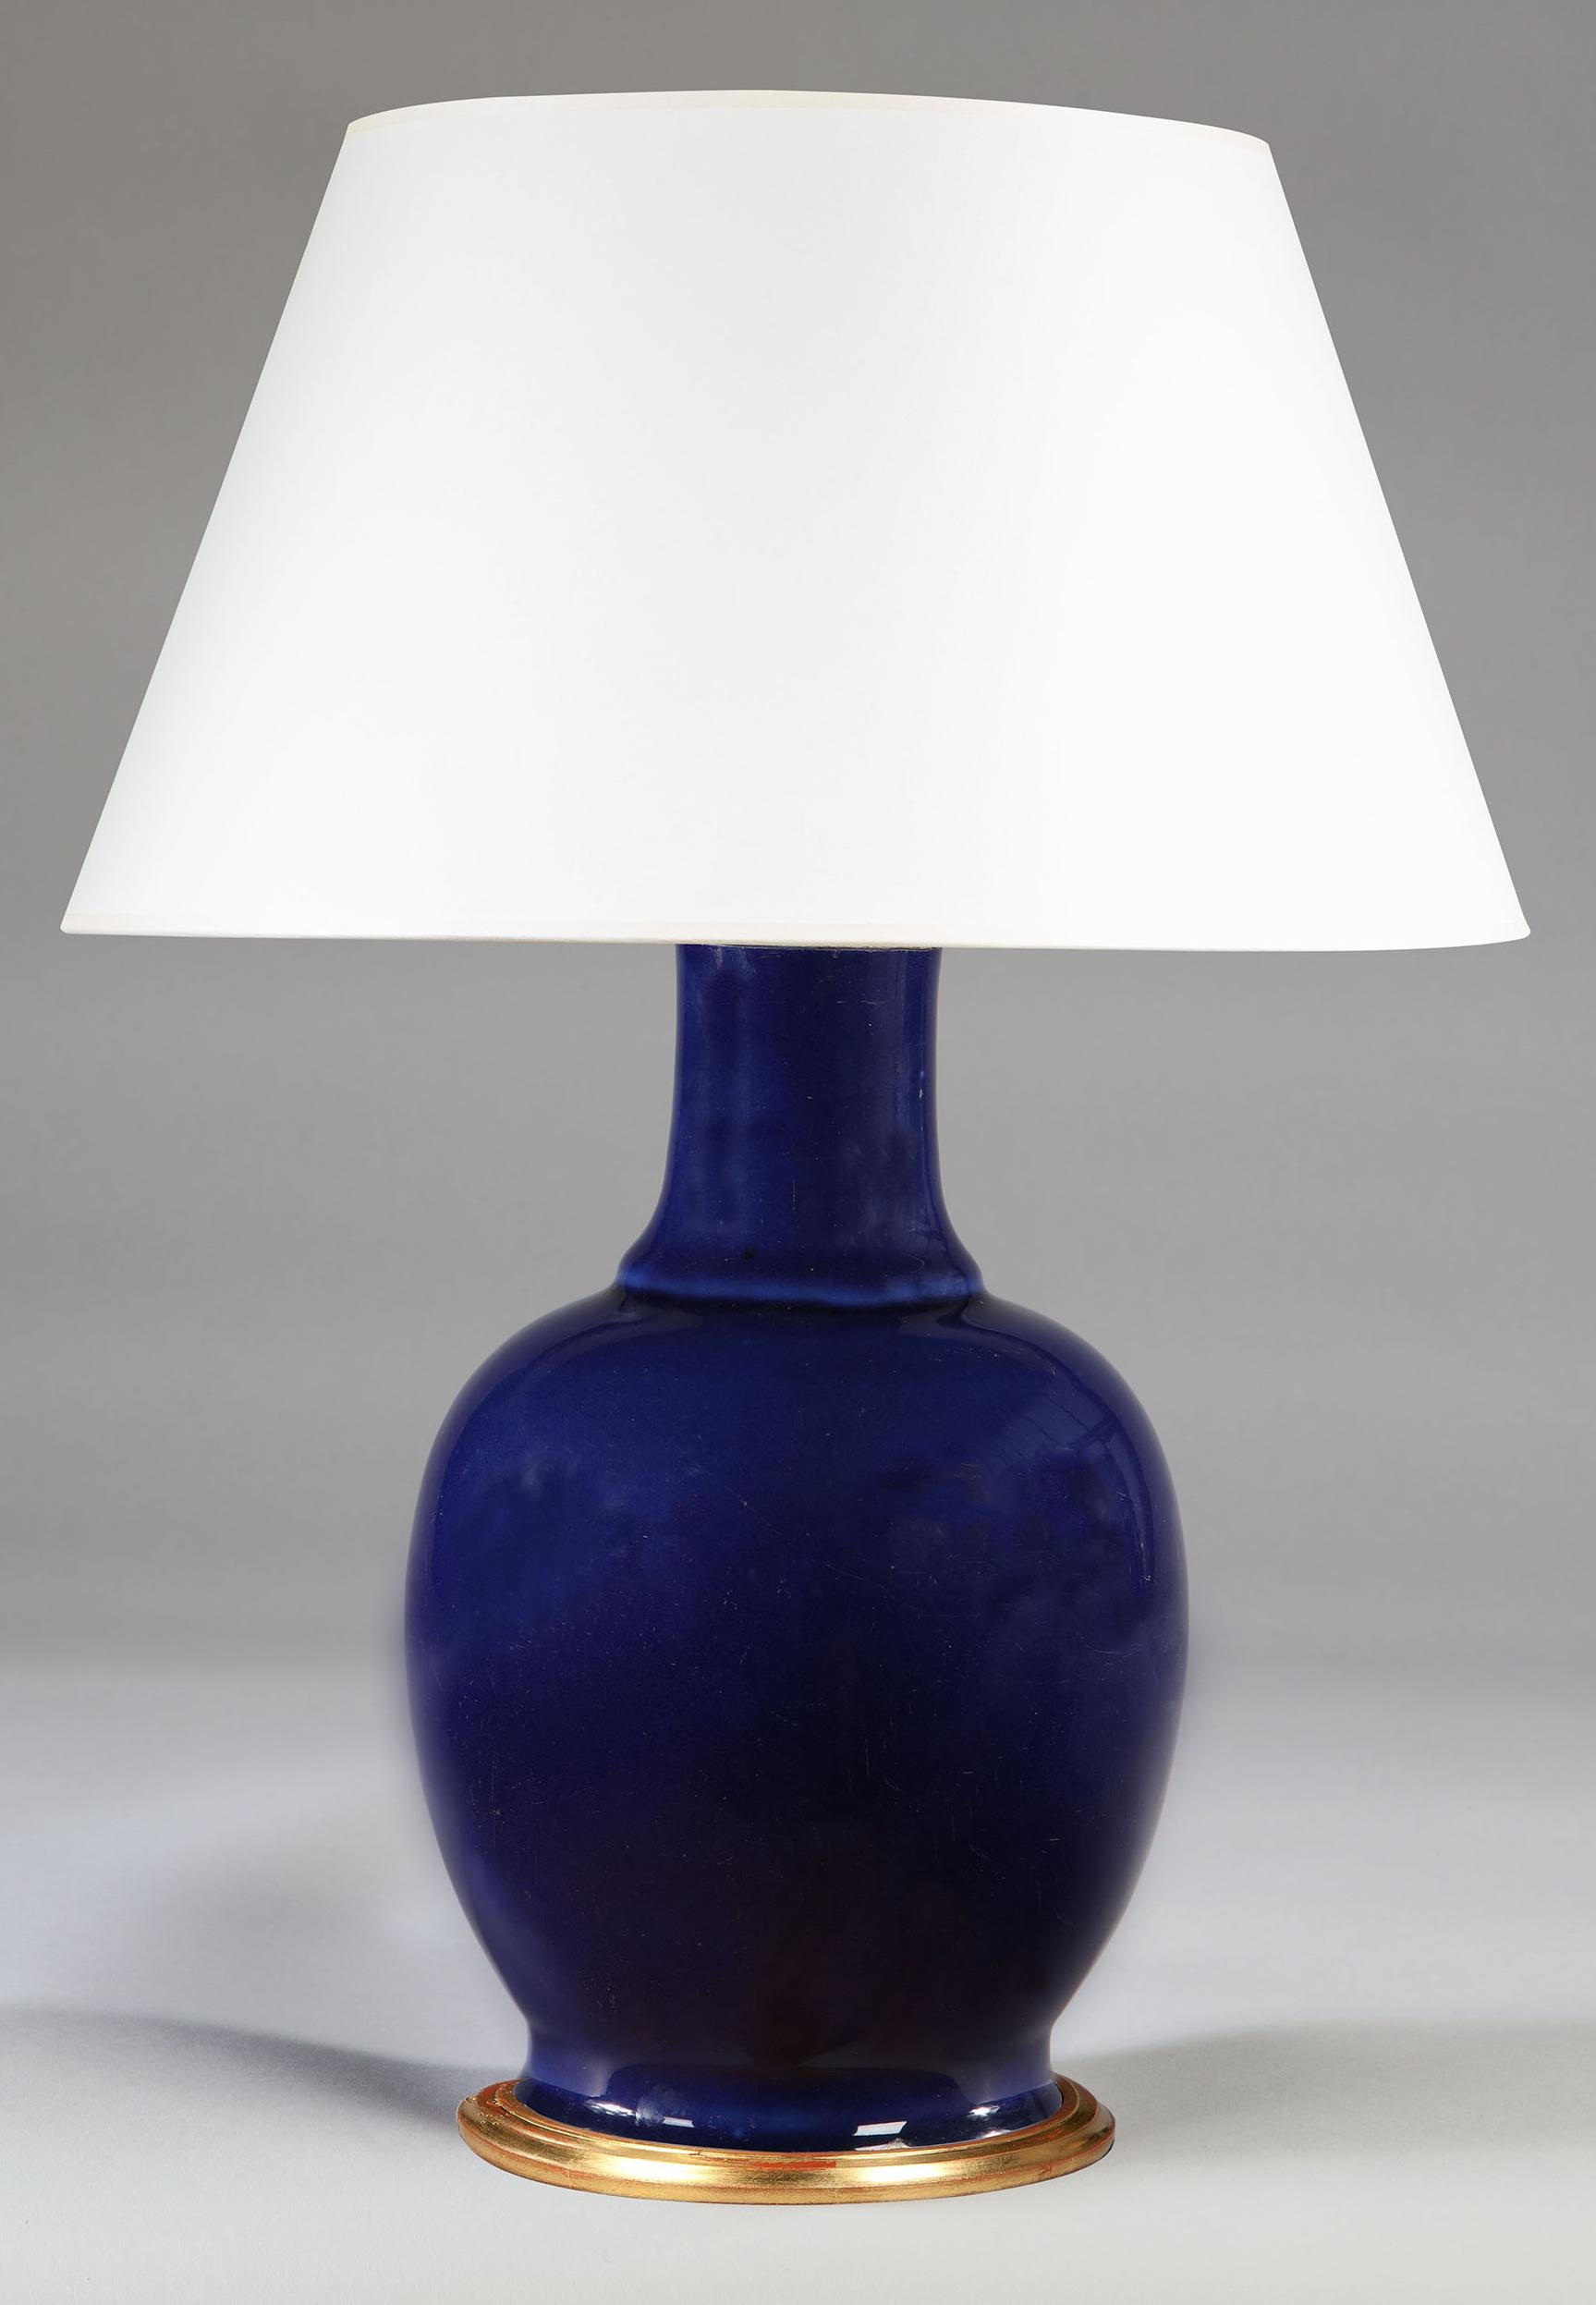 A fine late 19th century vase with a dark blue glaze, now mounted as a lamp.